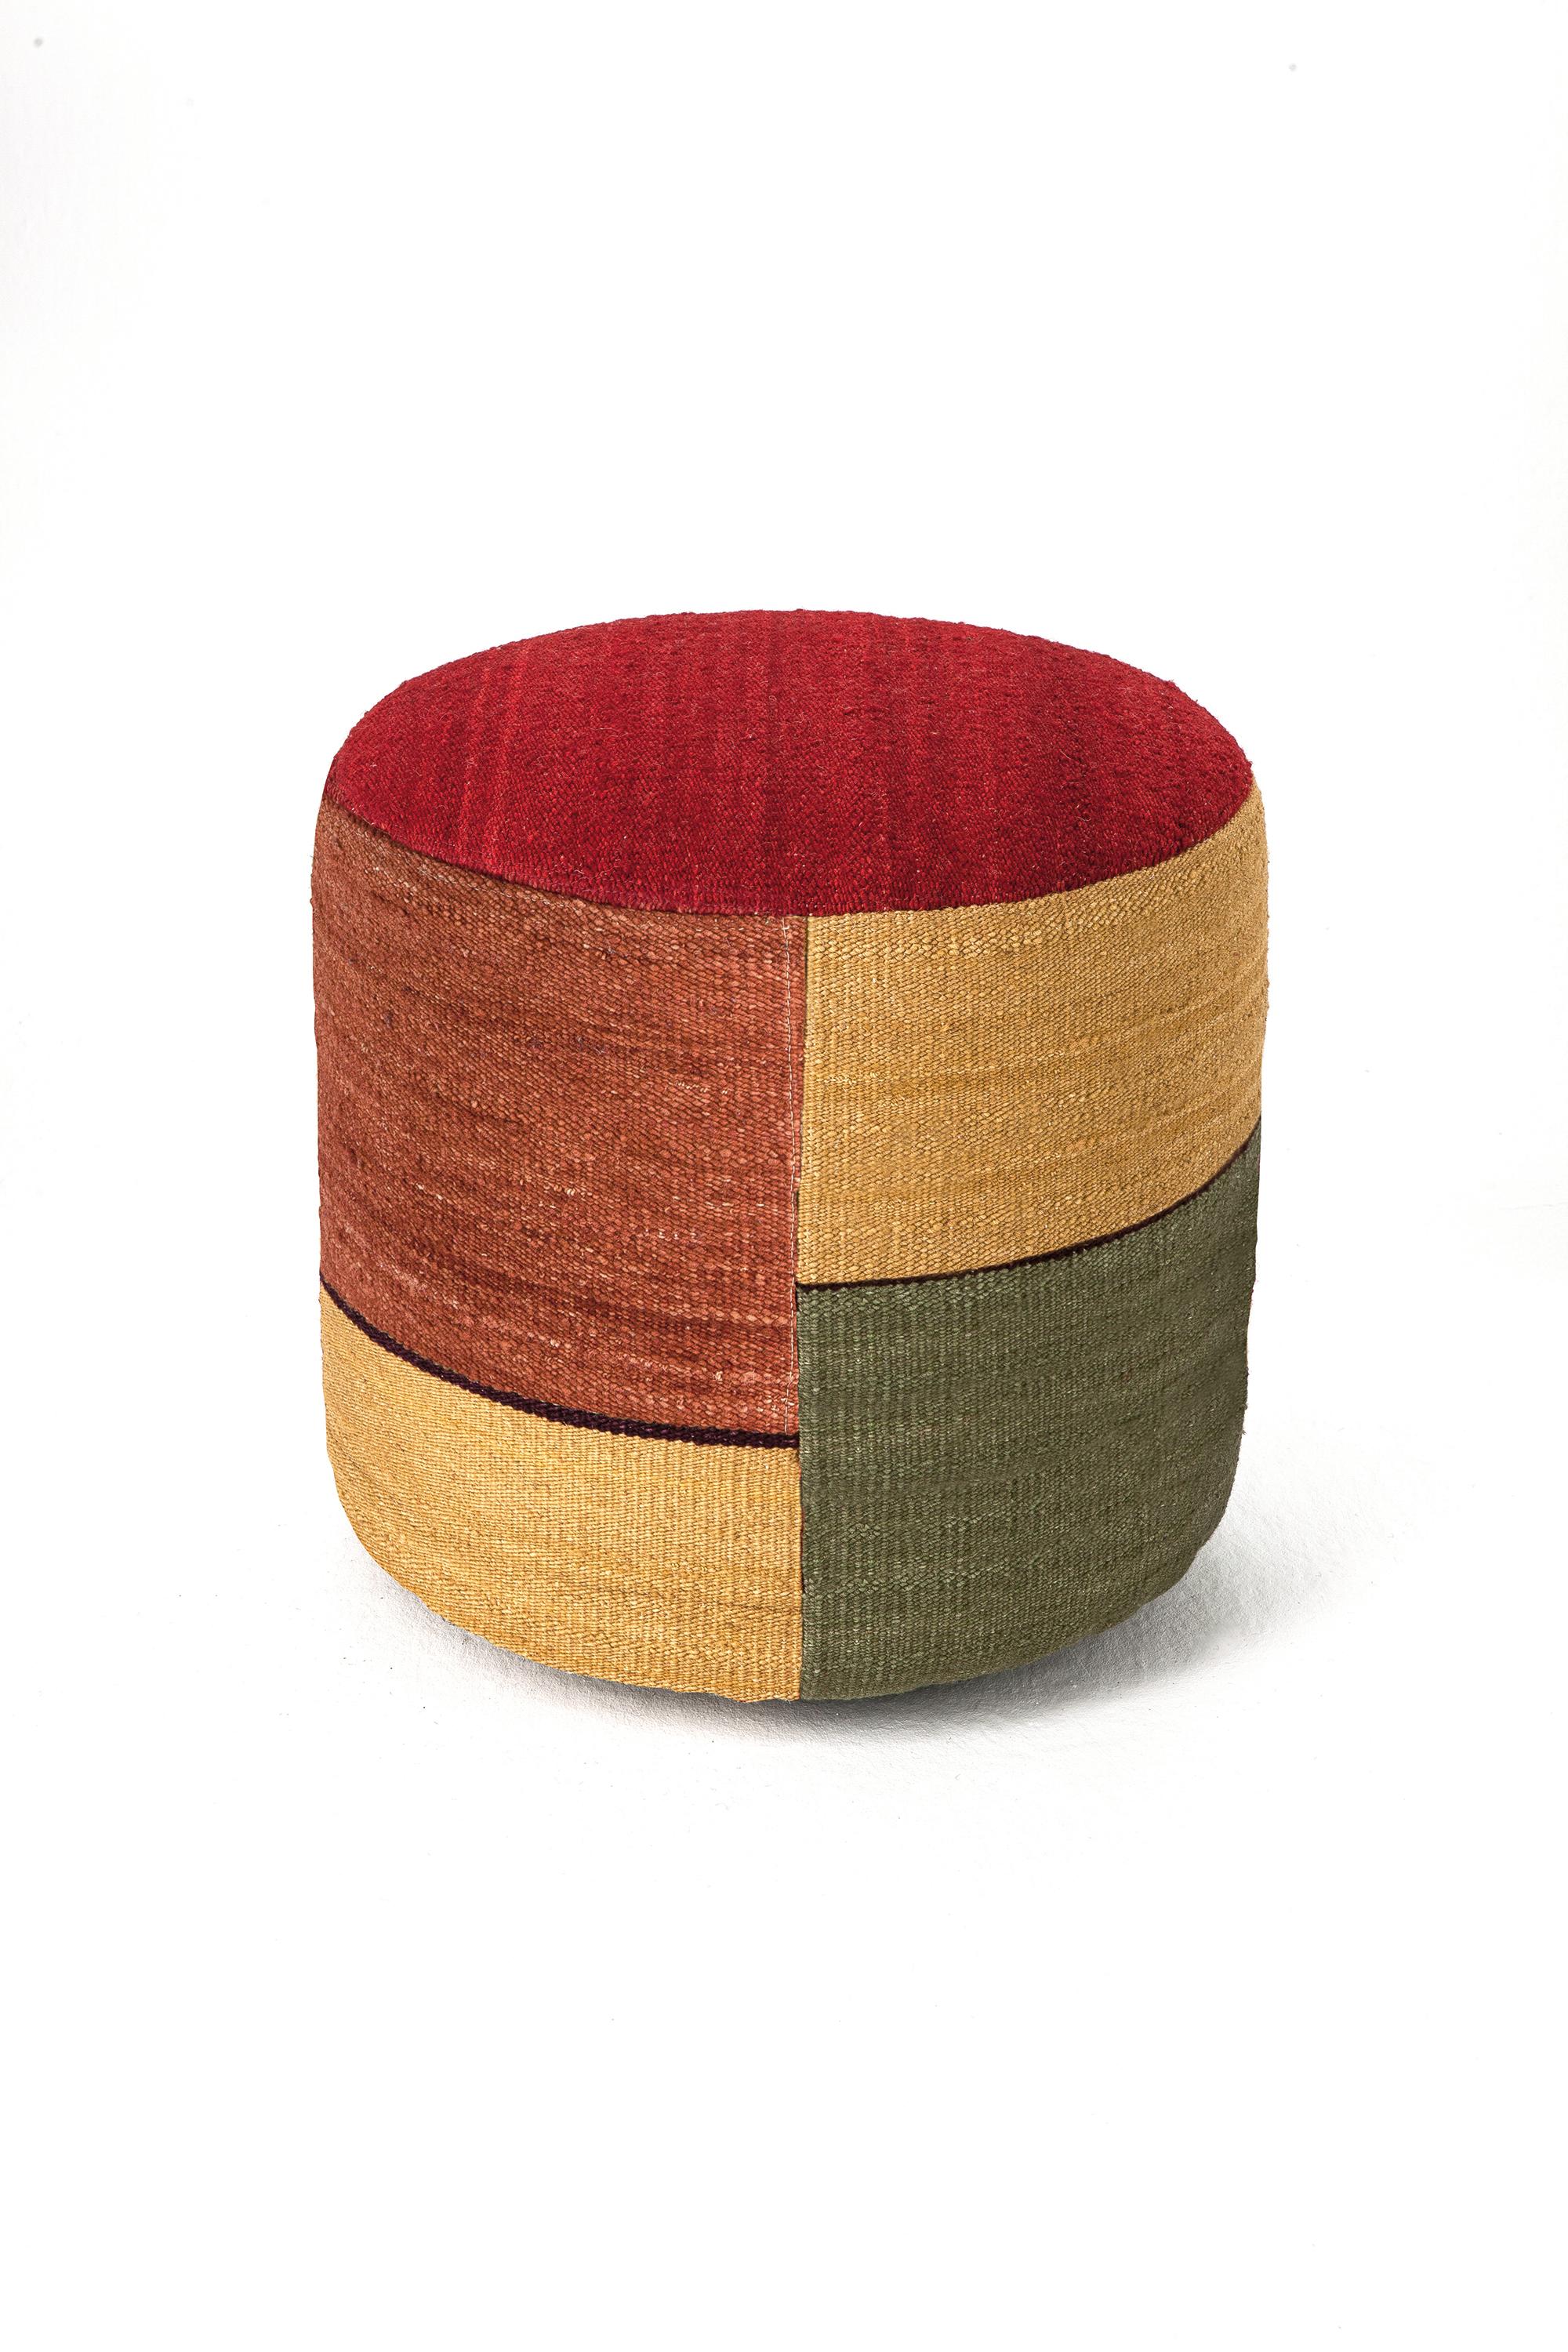 'Kilim 1' Pouf by Nani Marquina and Marcos Catalán for Nanimarquina For Sale 9